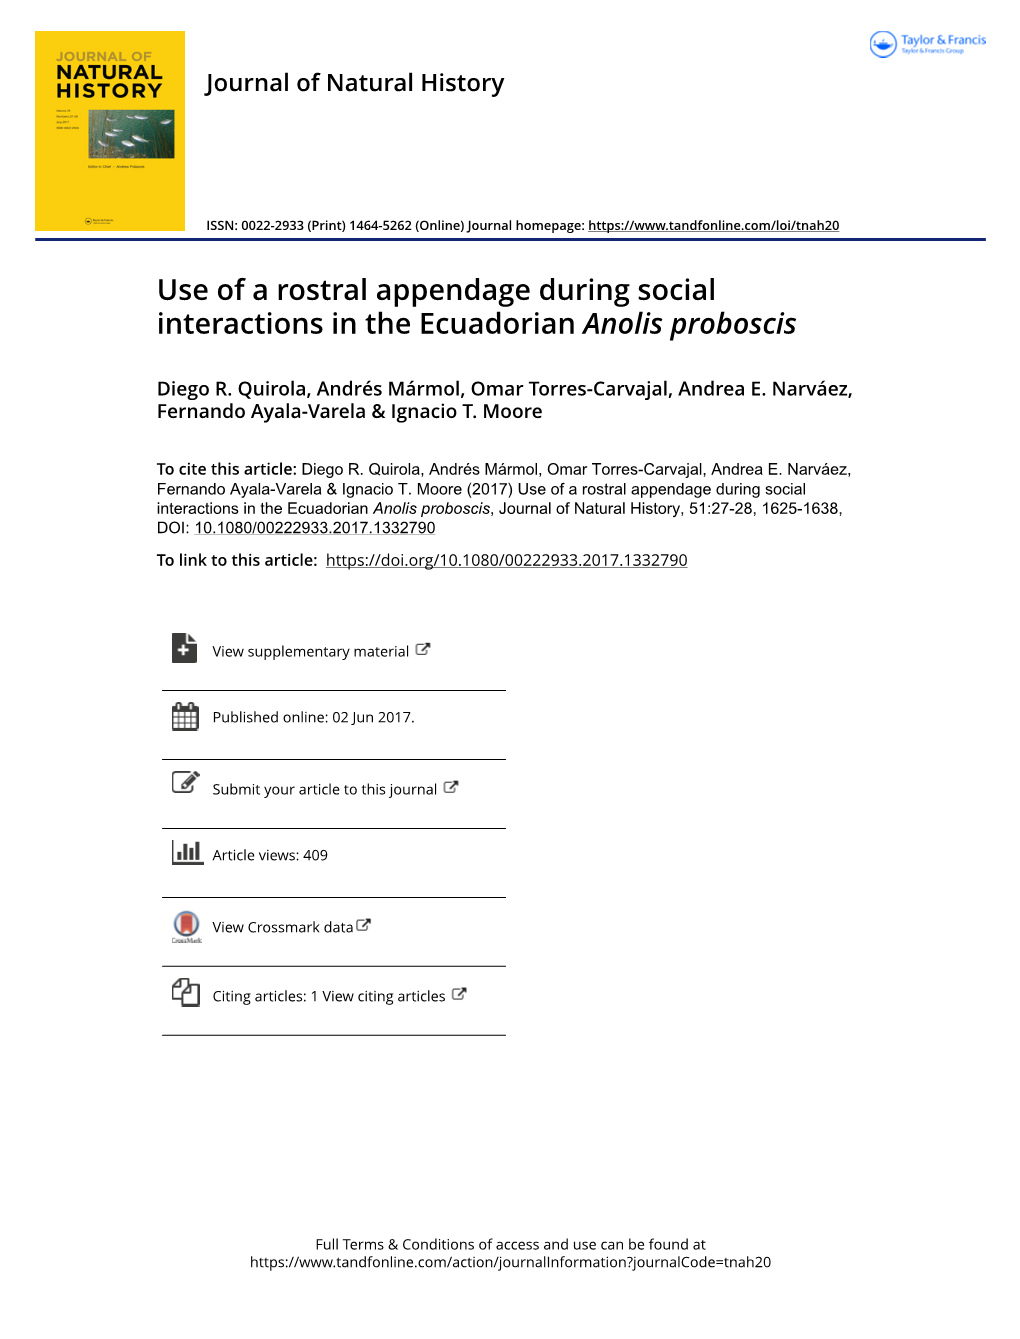 Use of a Rostral Appendage During Social Interactions in the Ecuadorian Anolis Proboscis